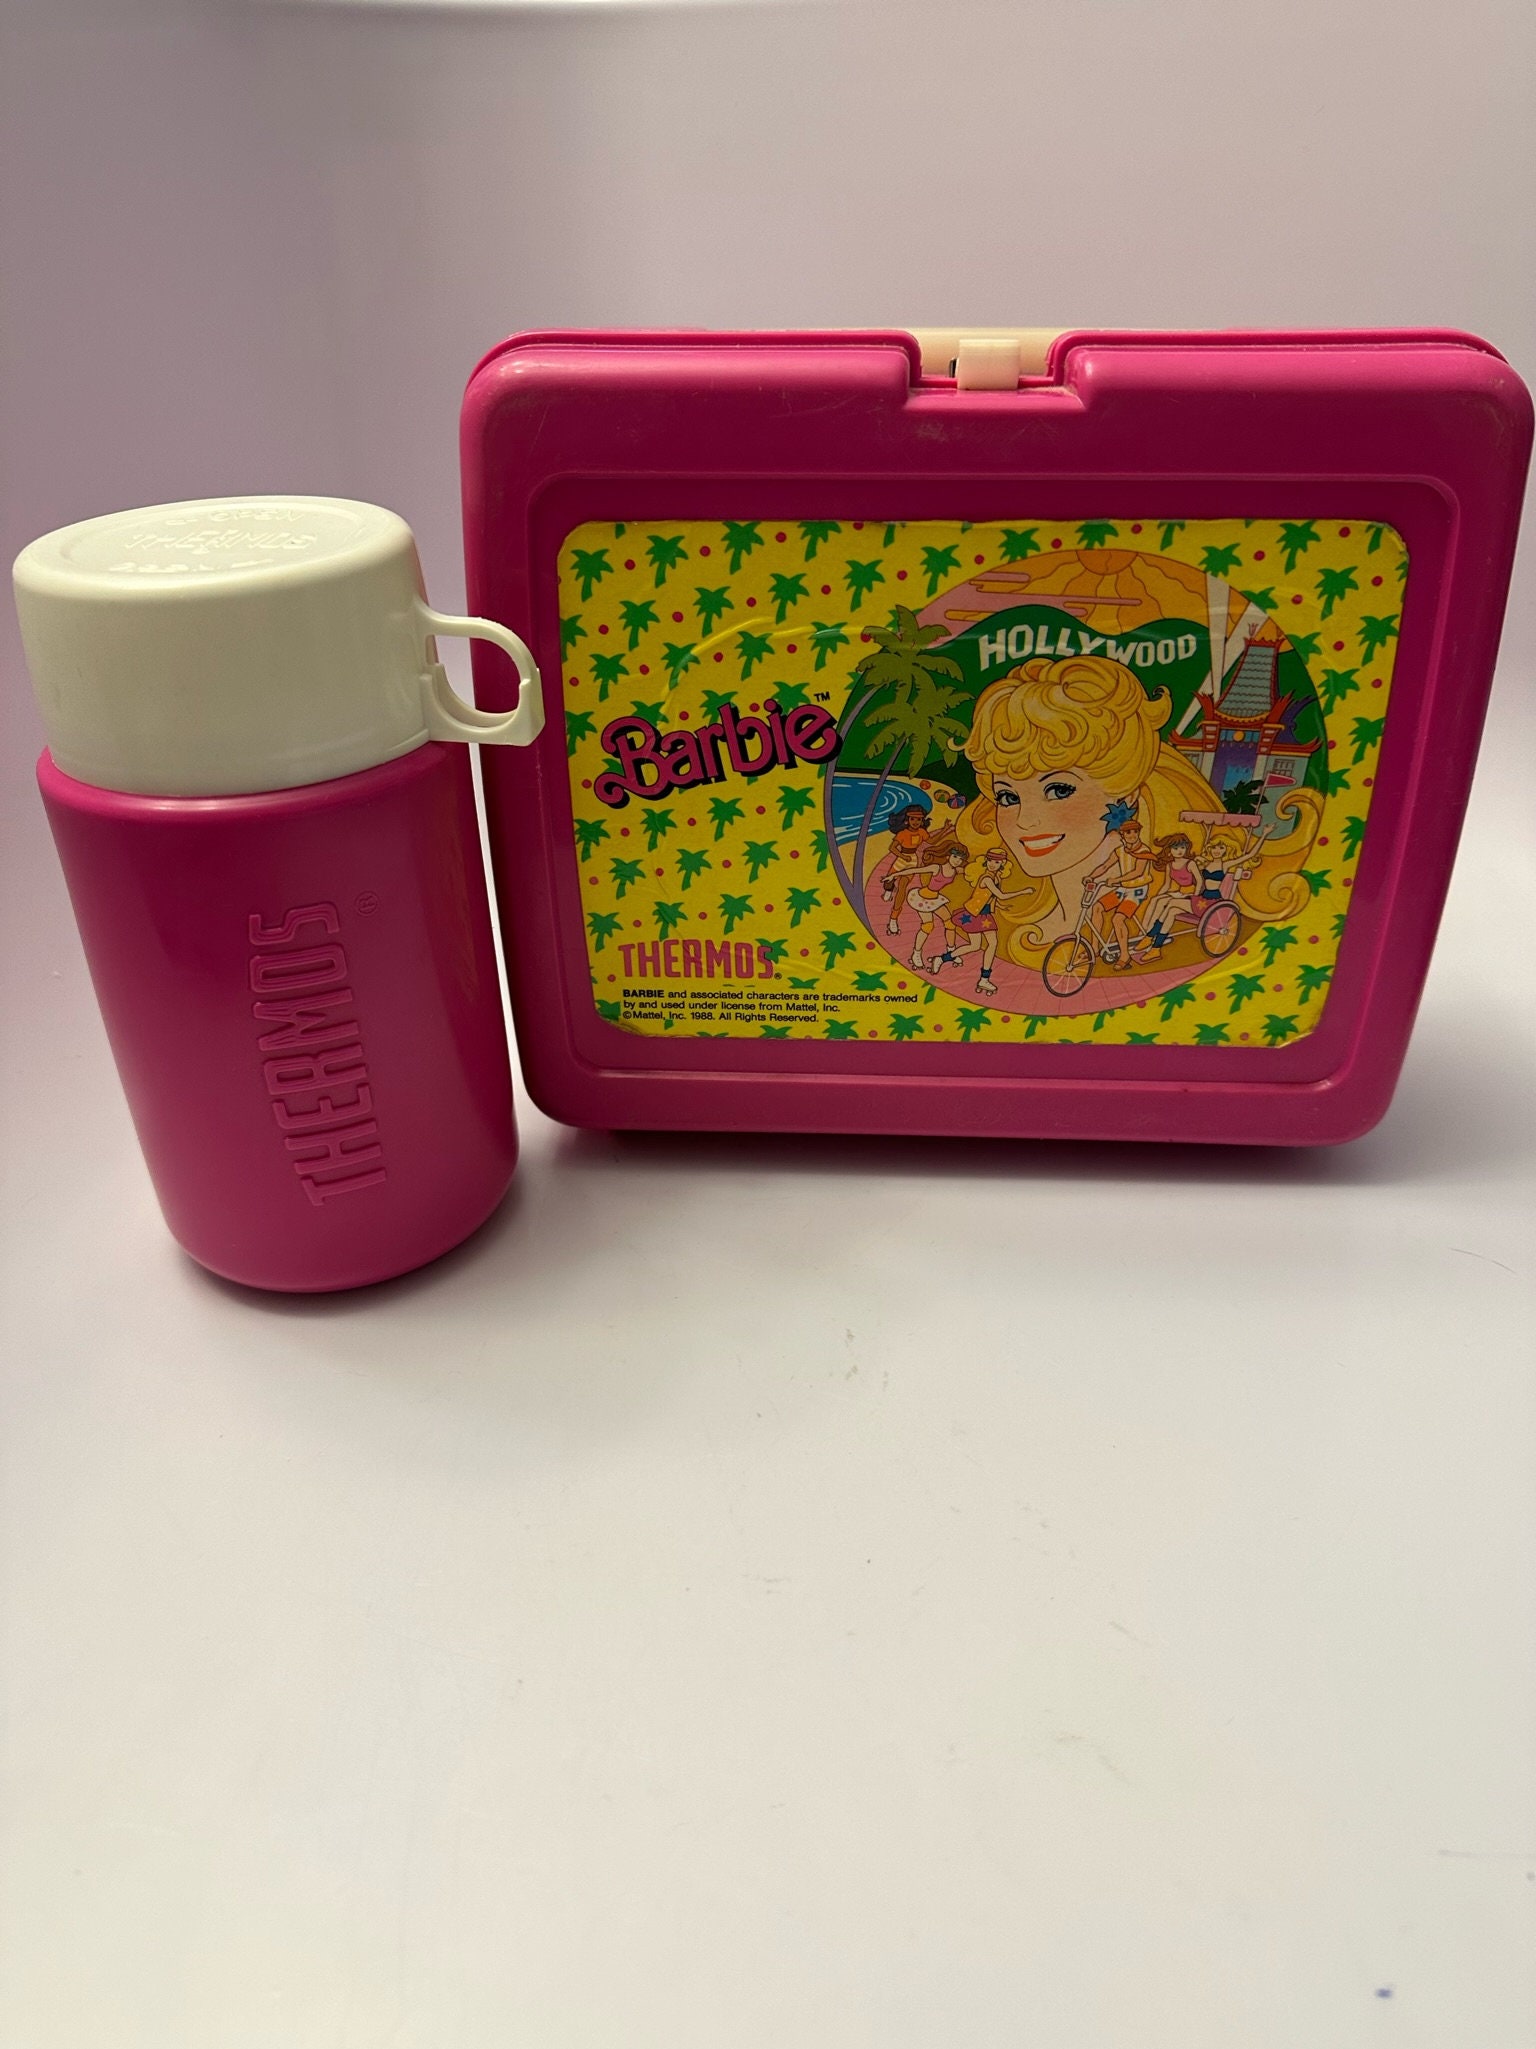 Thermos Barbie Novelty Lunch Kit 